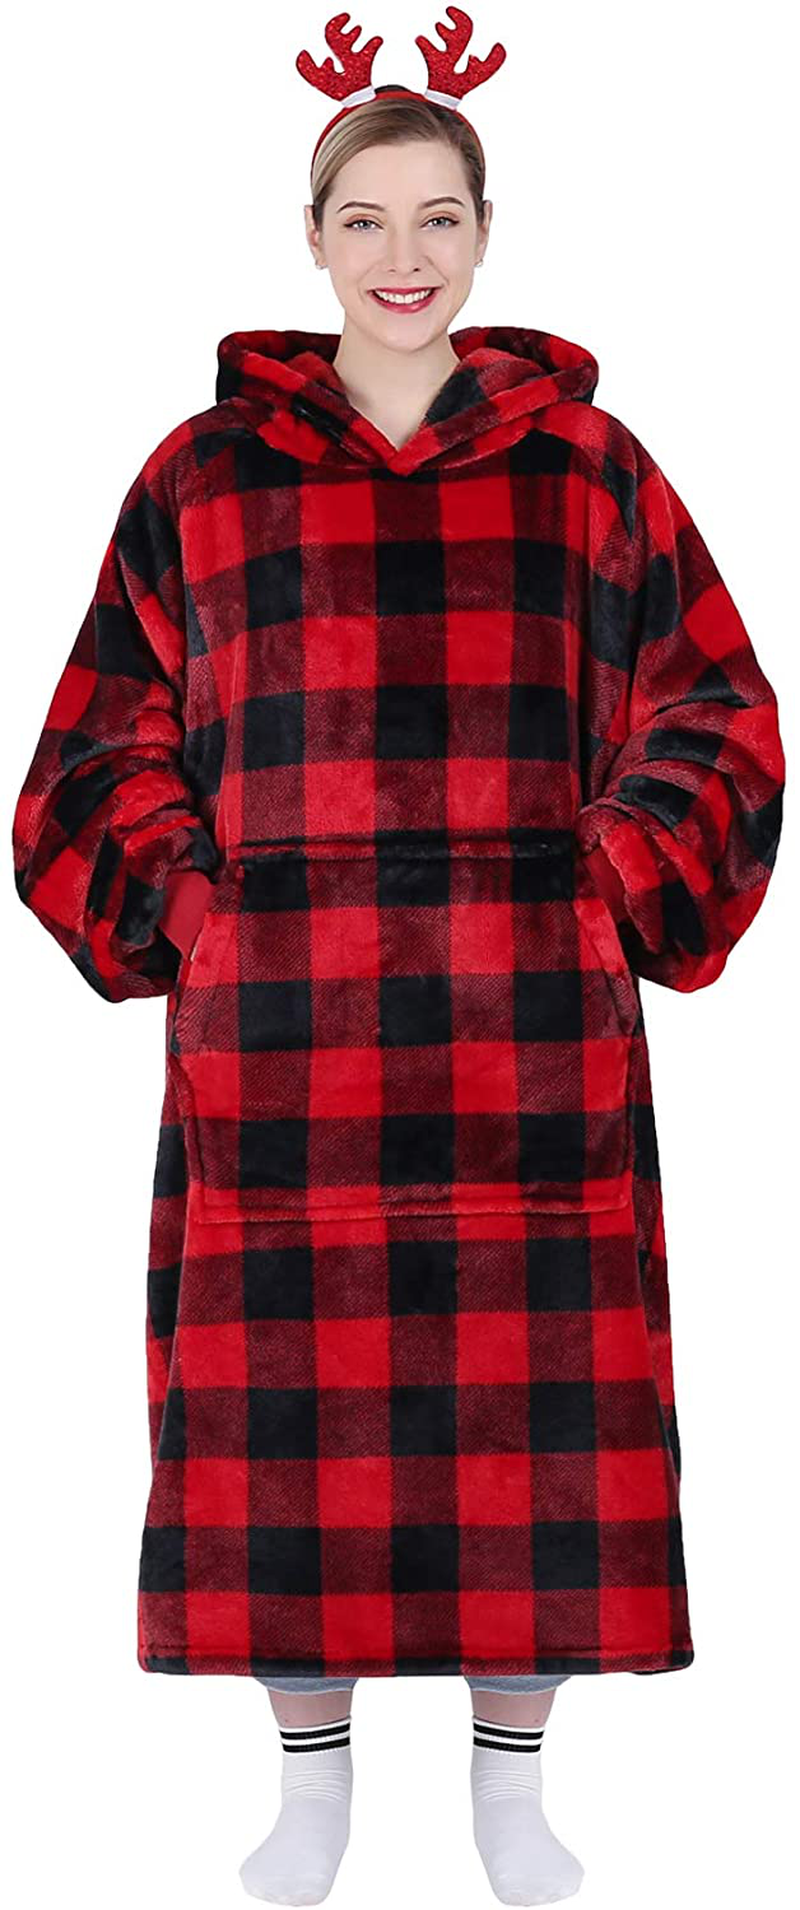 Waitu Wearable Blanket Sweatshirt for Women and Men, Super Warm and Cozy Giant Blanket Hoodie, Thick Flannel Blanket with Sleeves and Giant Pocket - Dark Gray